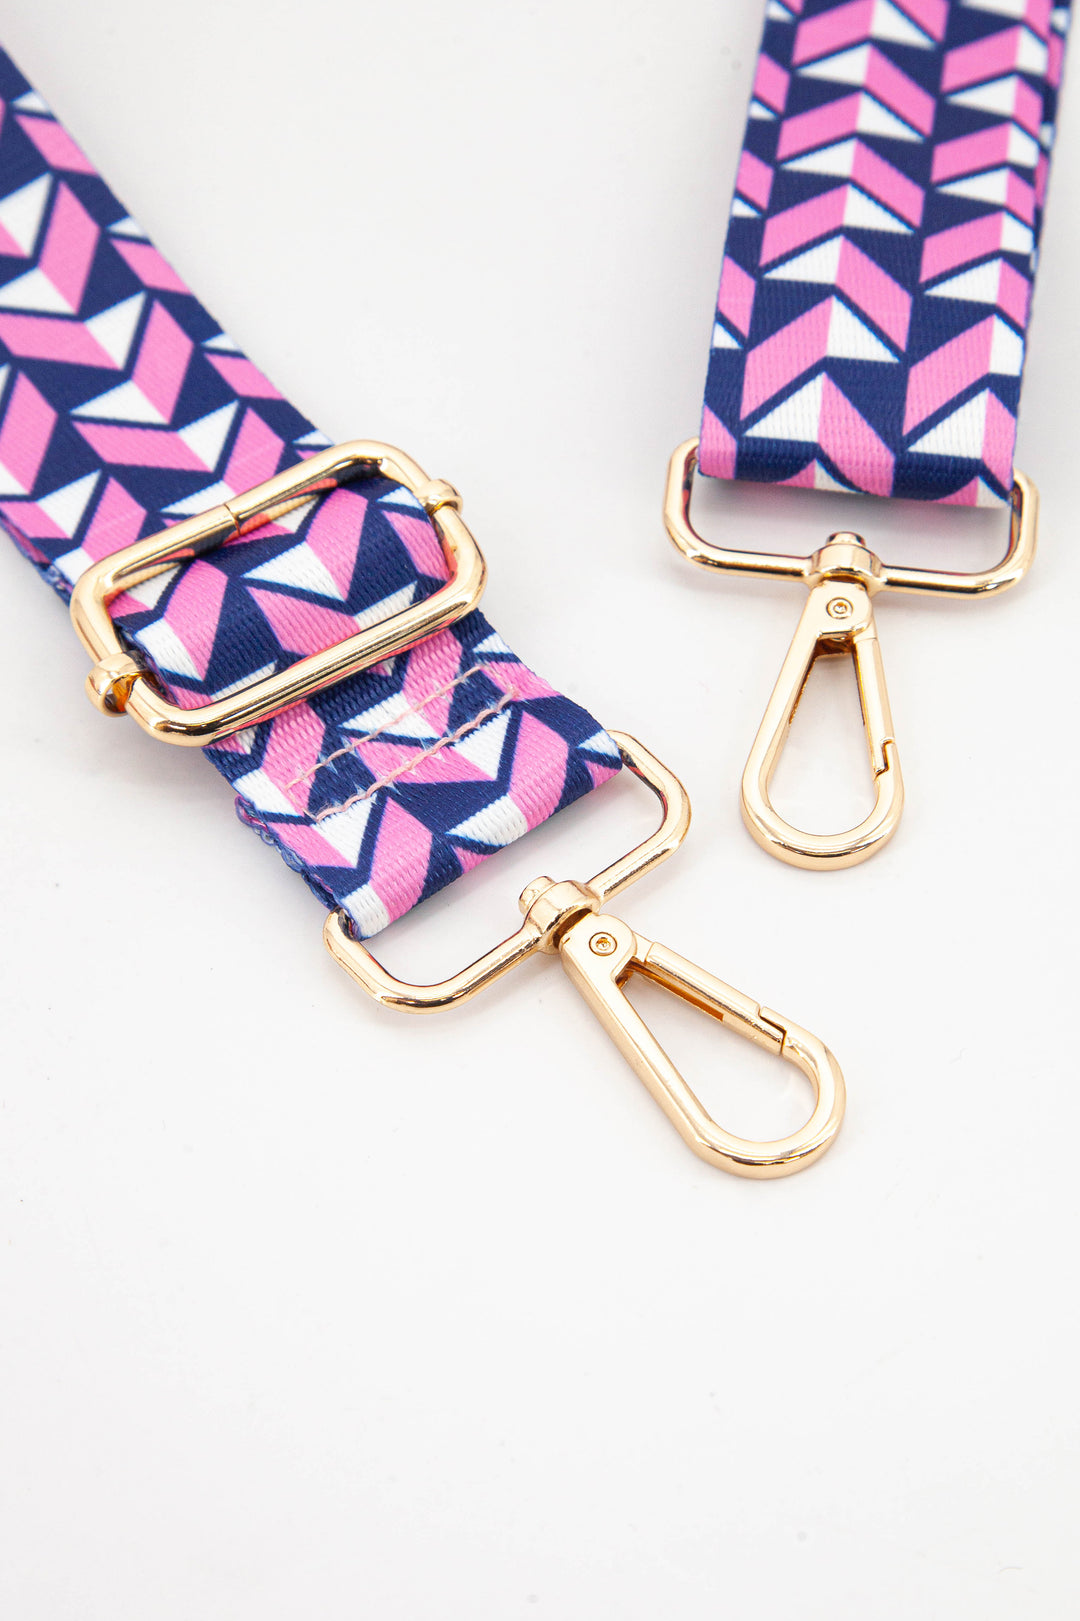 close up of the gold clip on snap hook attachments and the pink and navy blue 3d effect chevron pattern